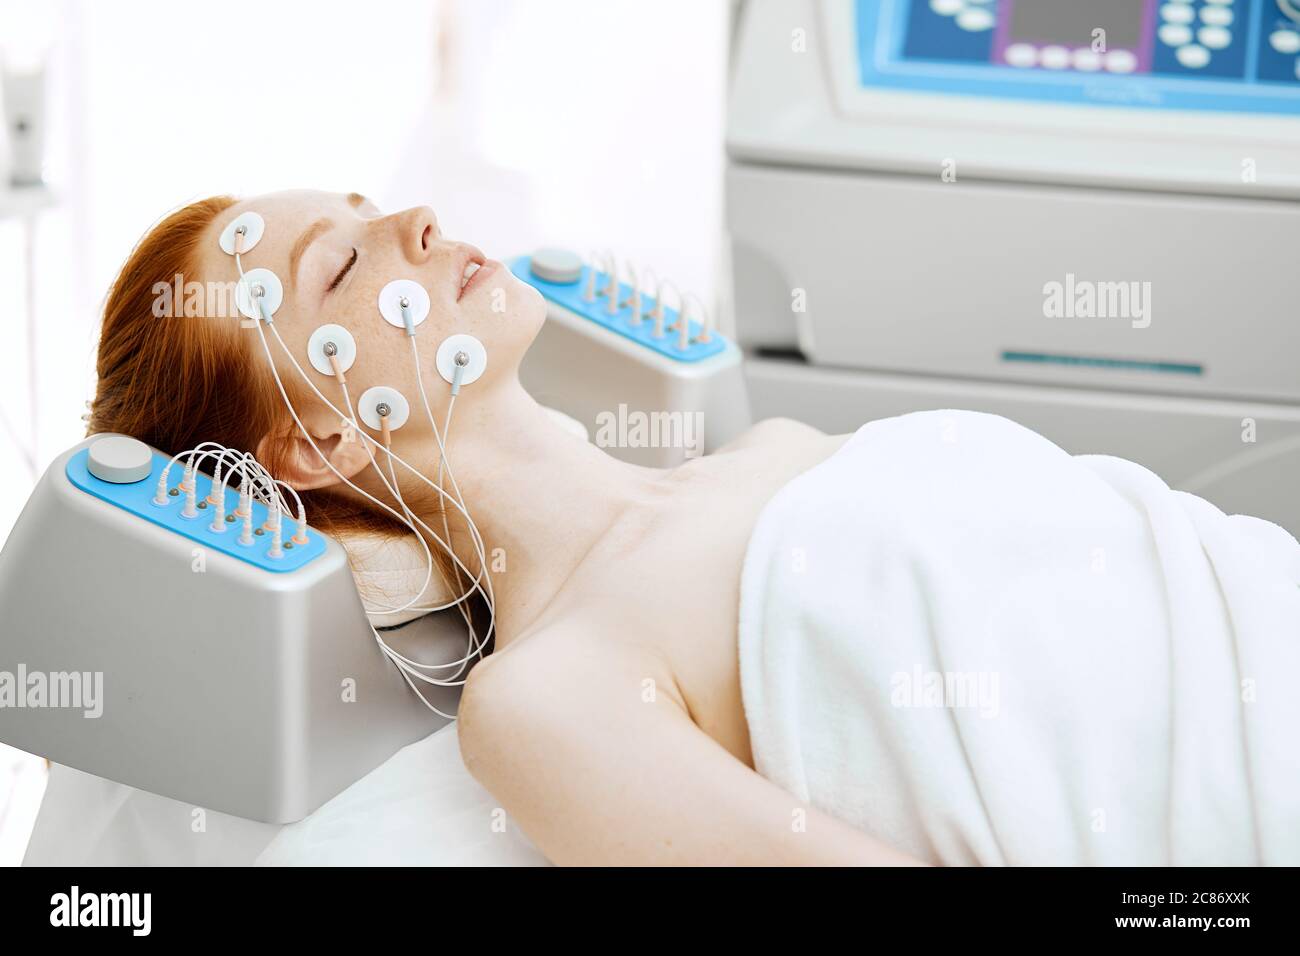 https://c8.alamy.com/comp/2C86XXK/hardware-cosmetology-face-and-body-care-spa-treatment-woman-getting-electrical-musculs-stimulation-lying-with-electrodes-on-face-in-beauty-salon-2C86XXK.jpg